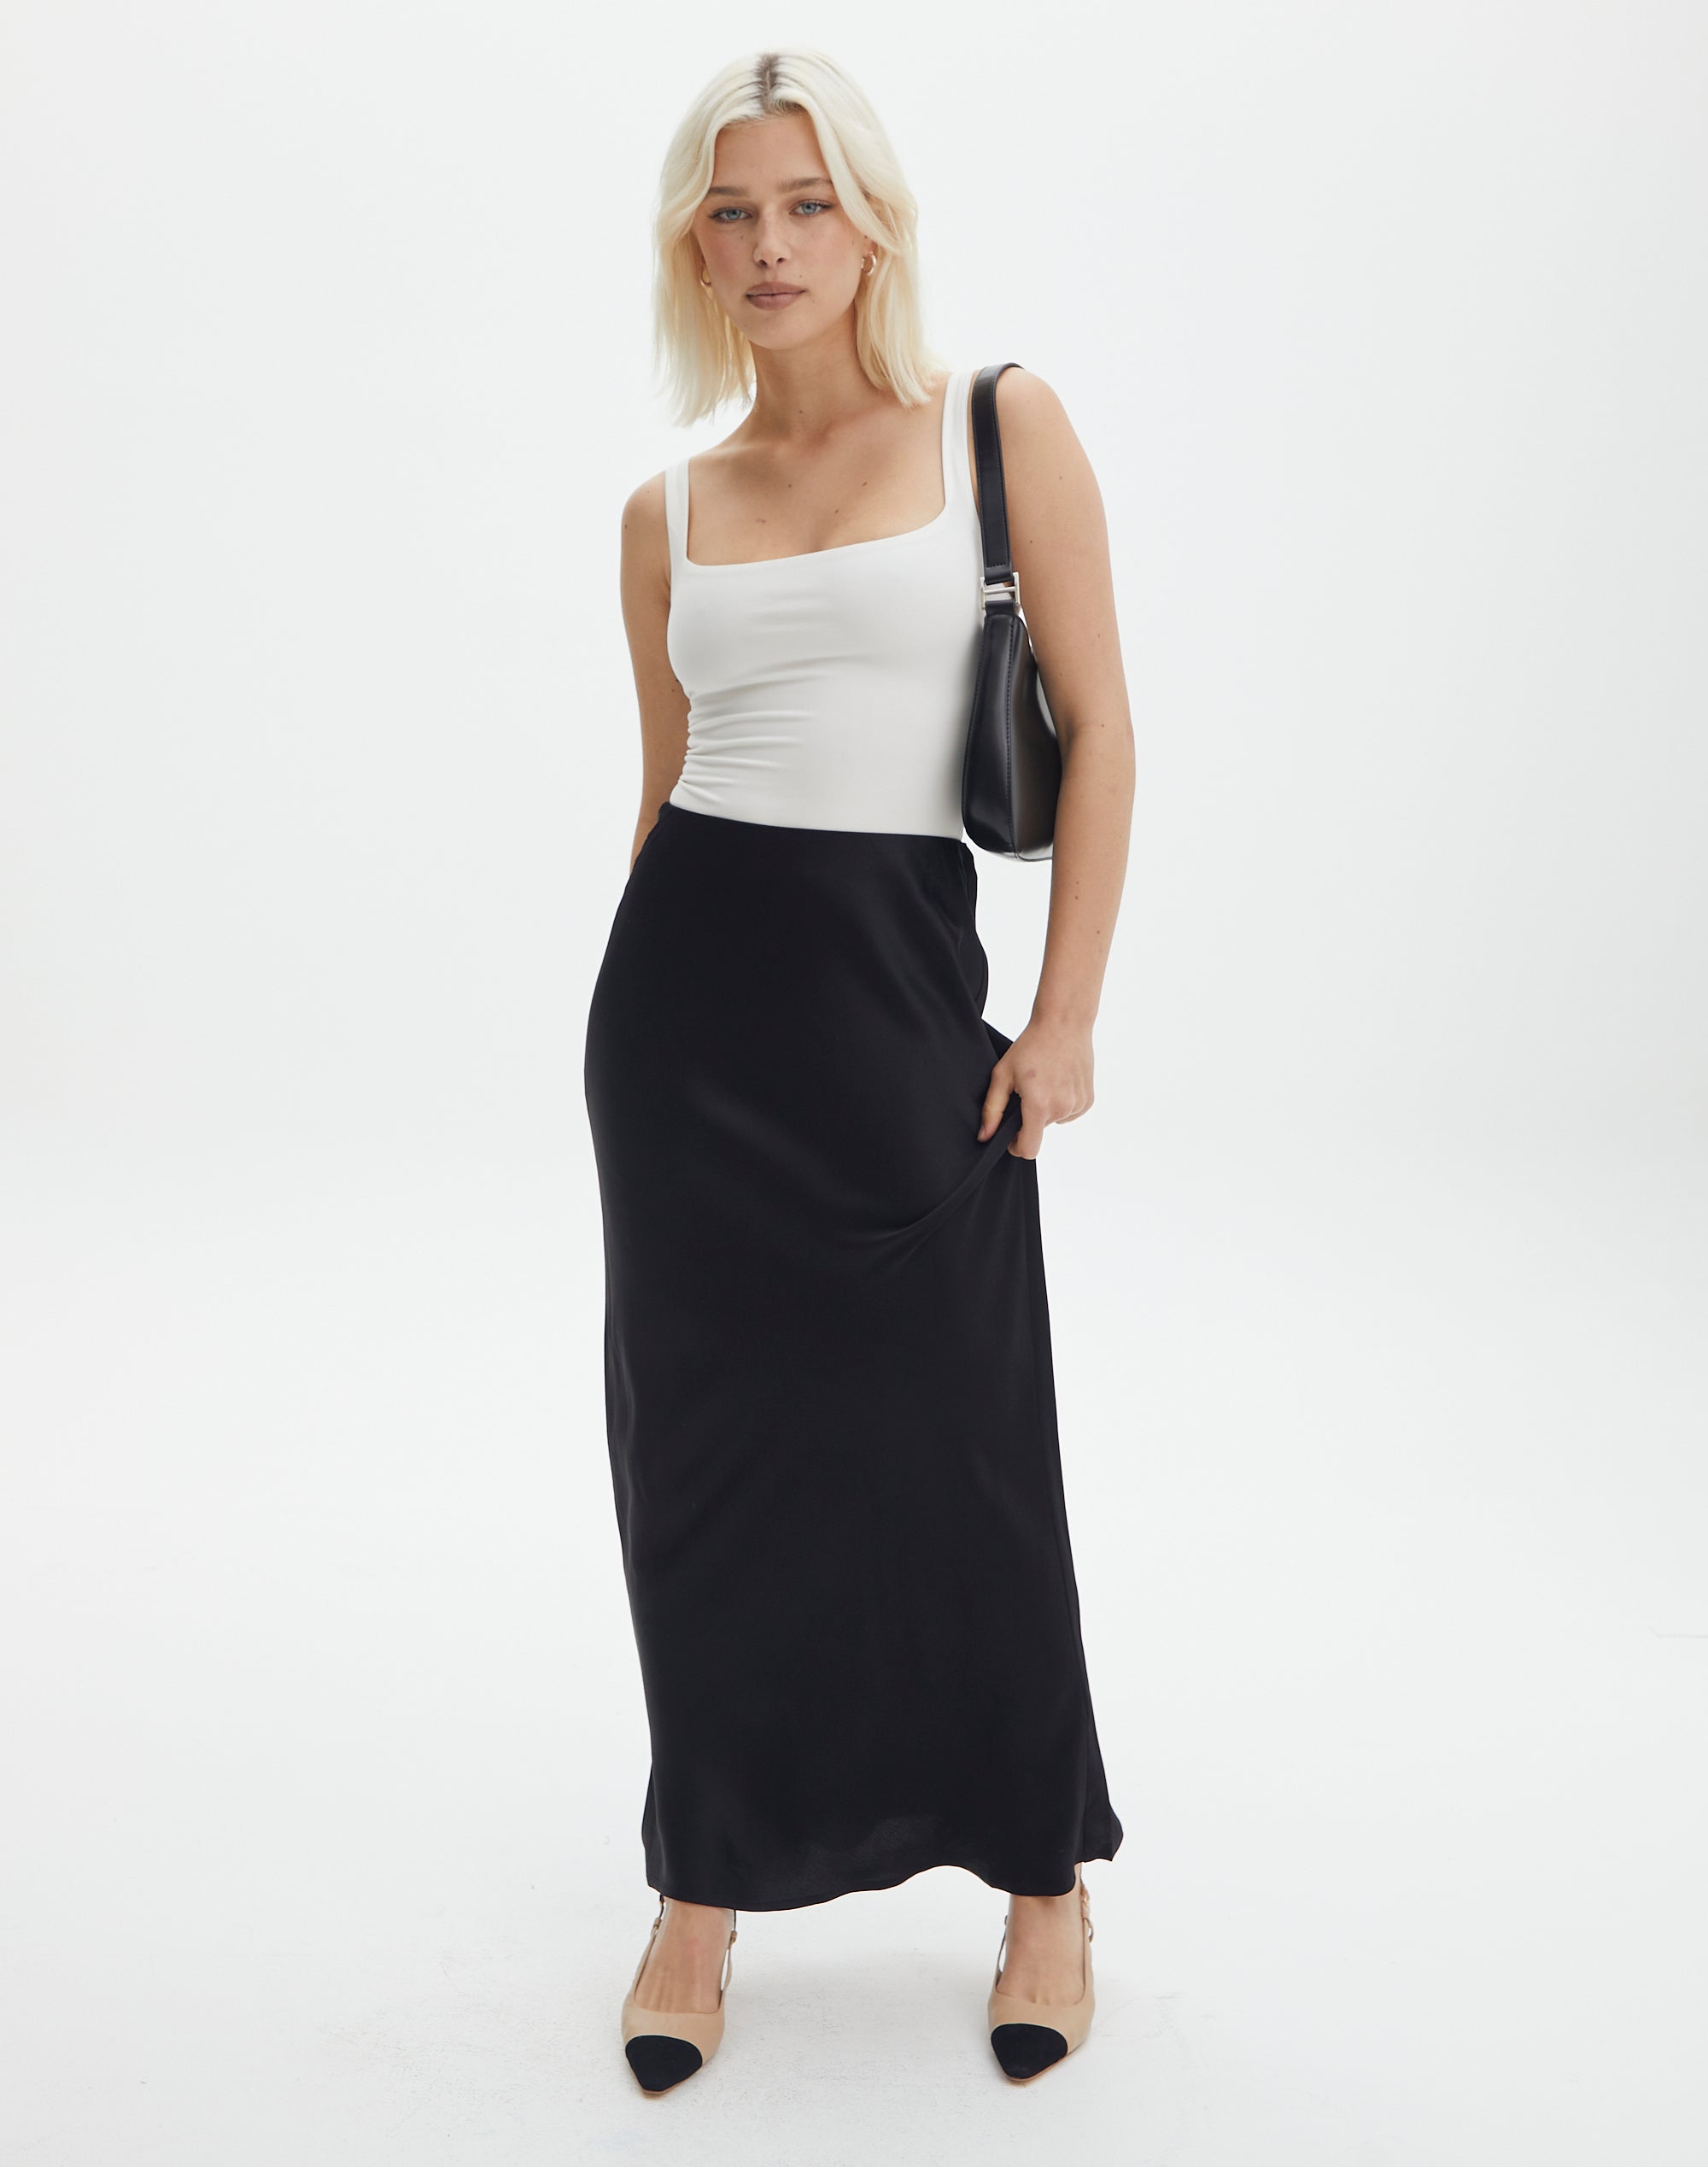 Shop Solid Skirt Slip with Elasticated Waistband and Side Slit Online